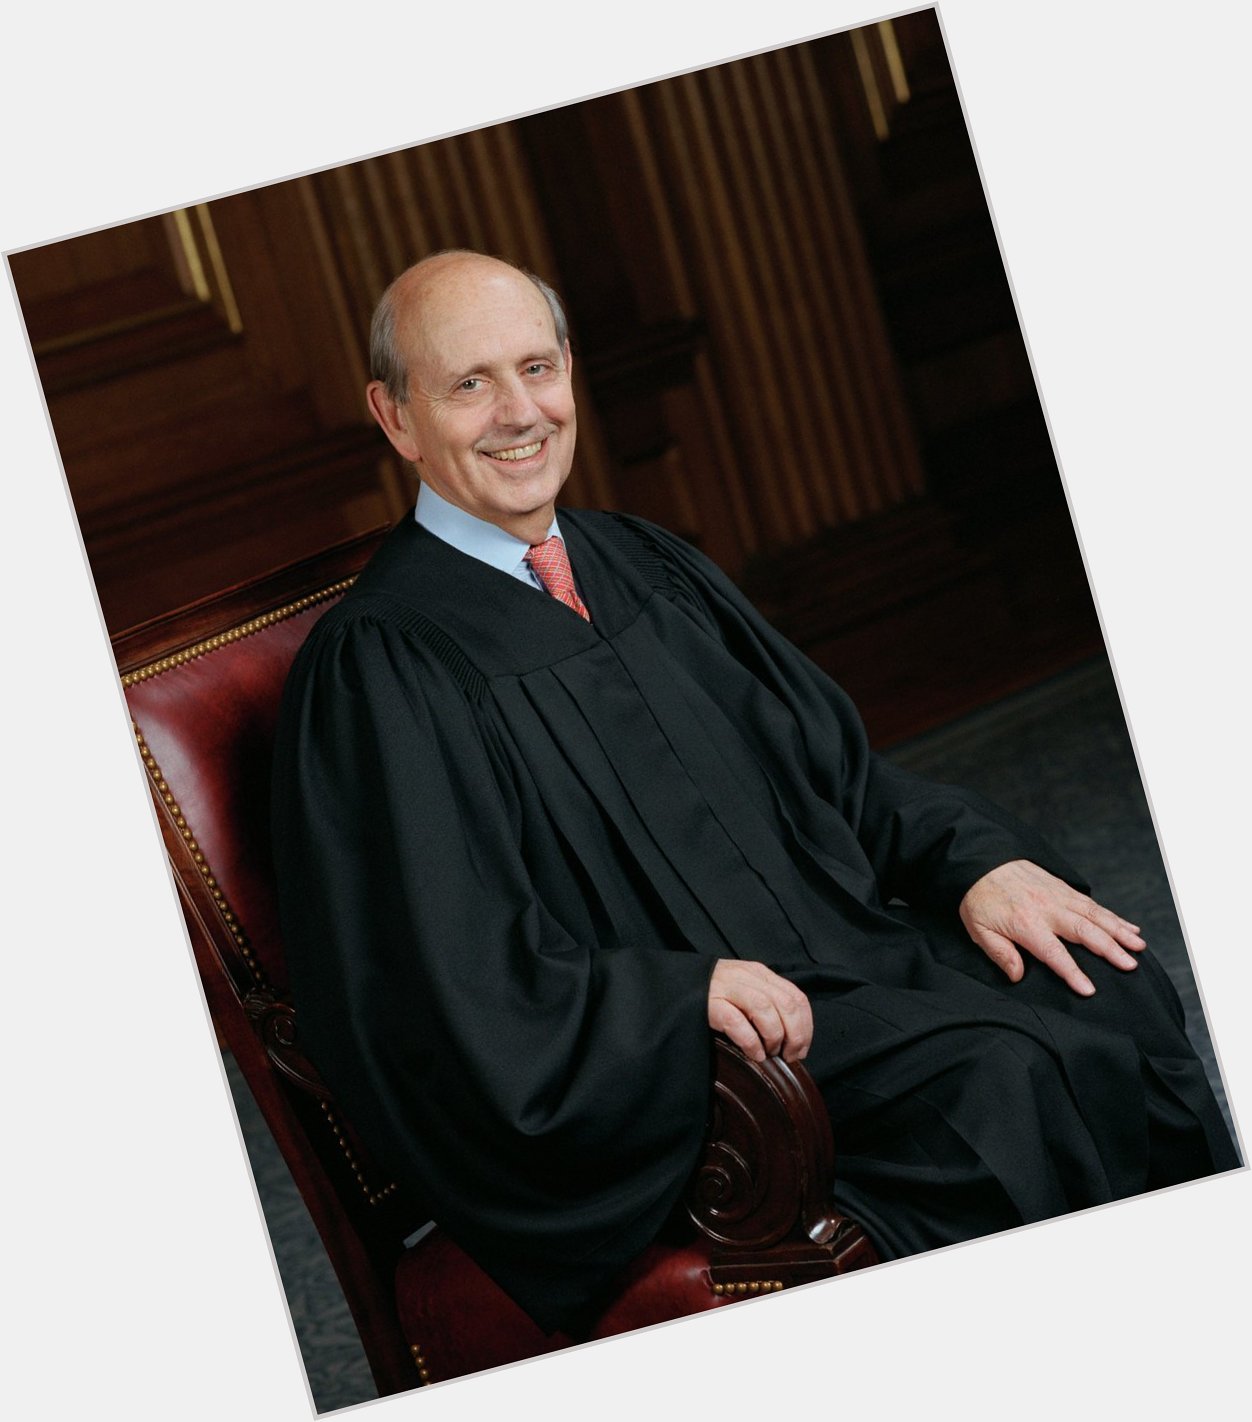 Happy Birthday to Supreme Court Justice Stephen Breyer, born on this day in 1938. 